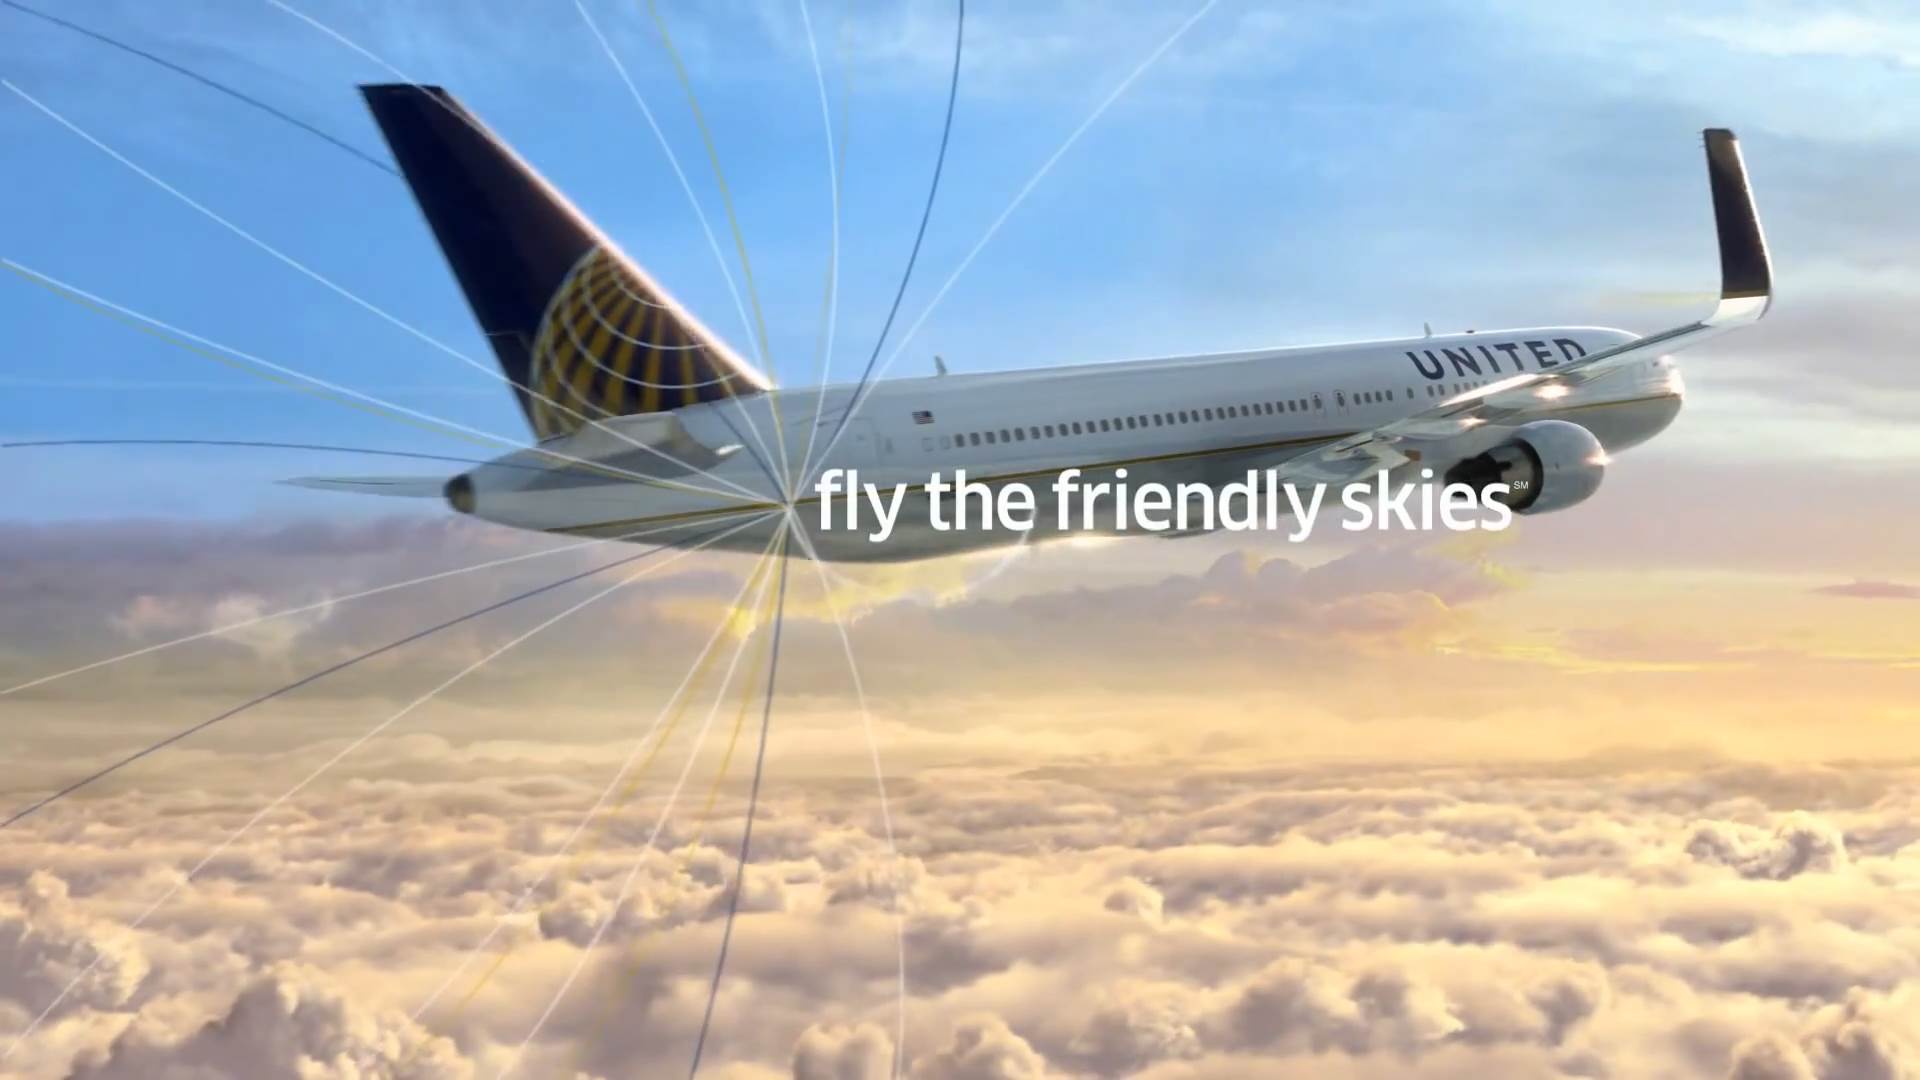 Will United Airlines Ever Return To The “Friendly Skies?”